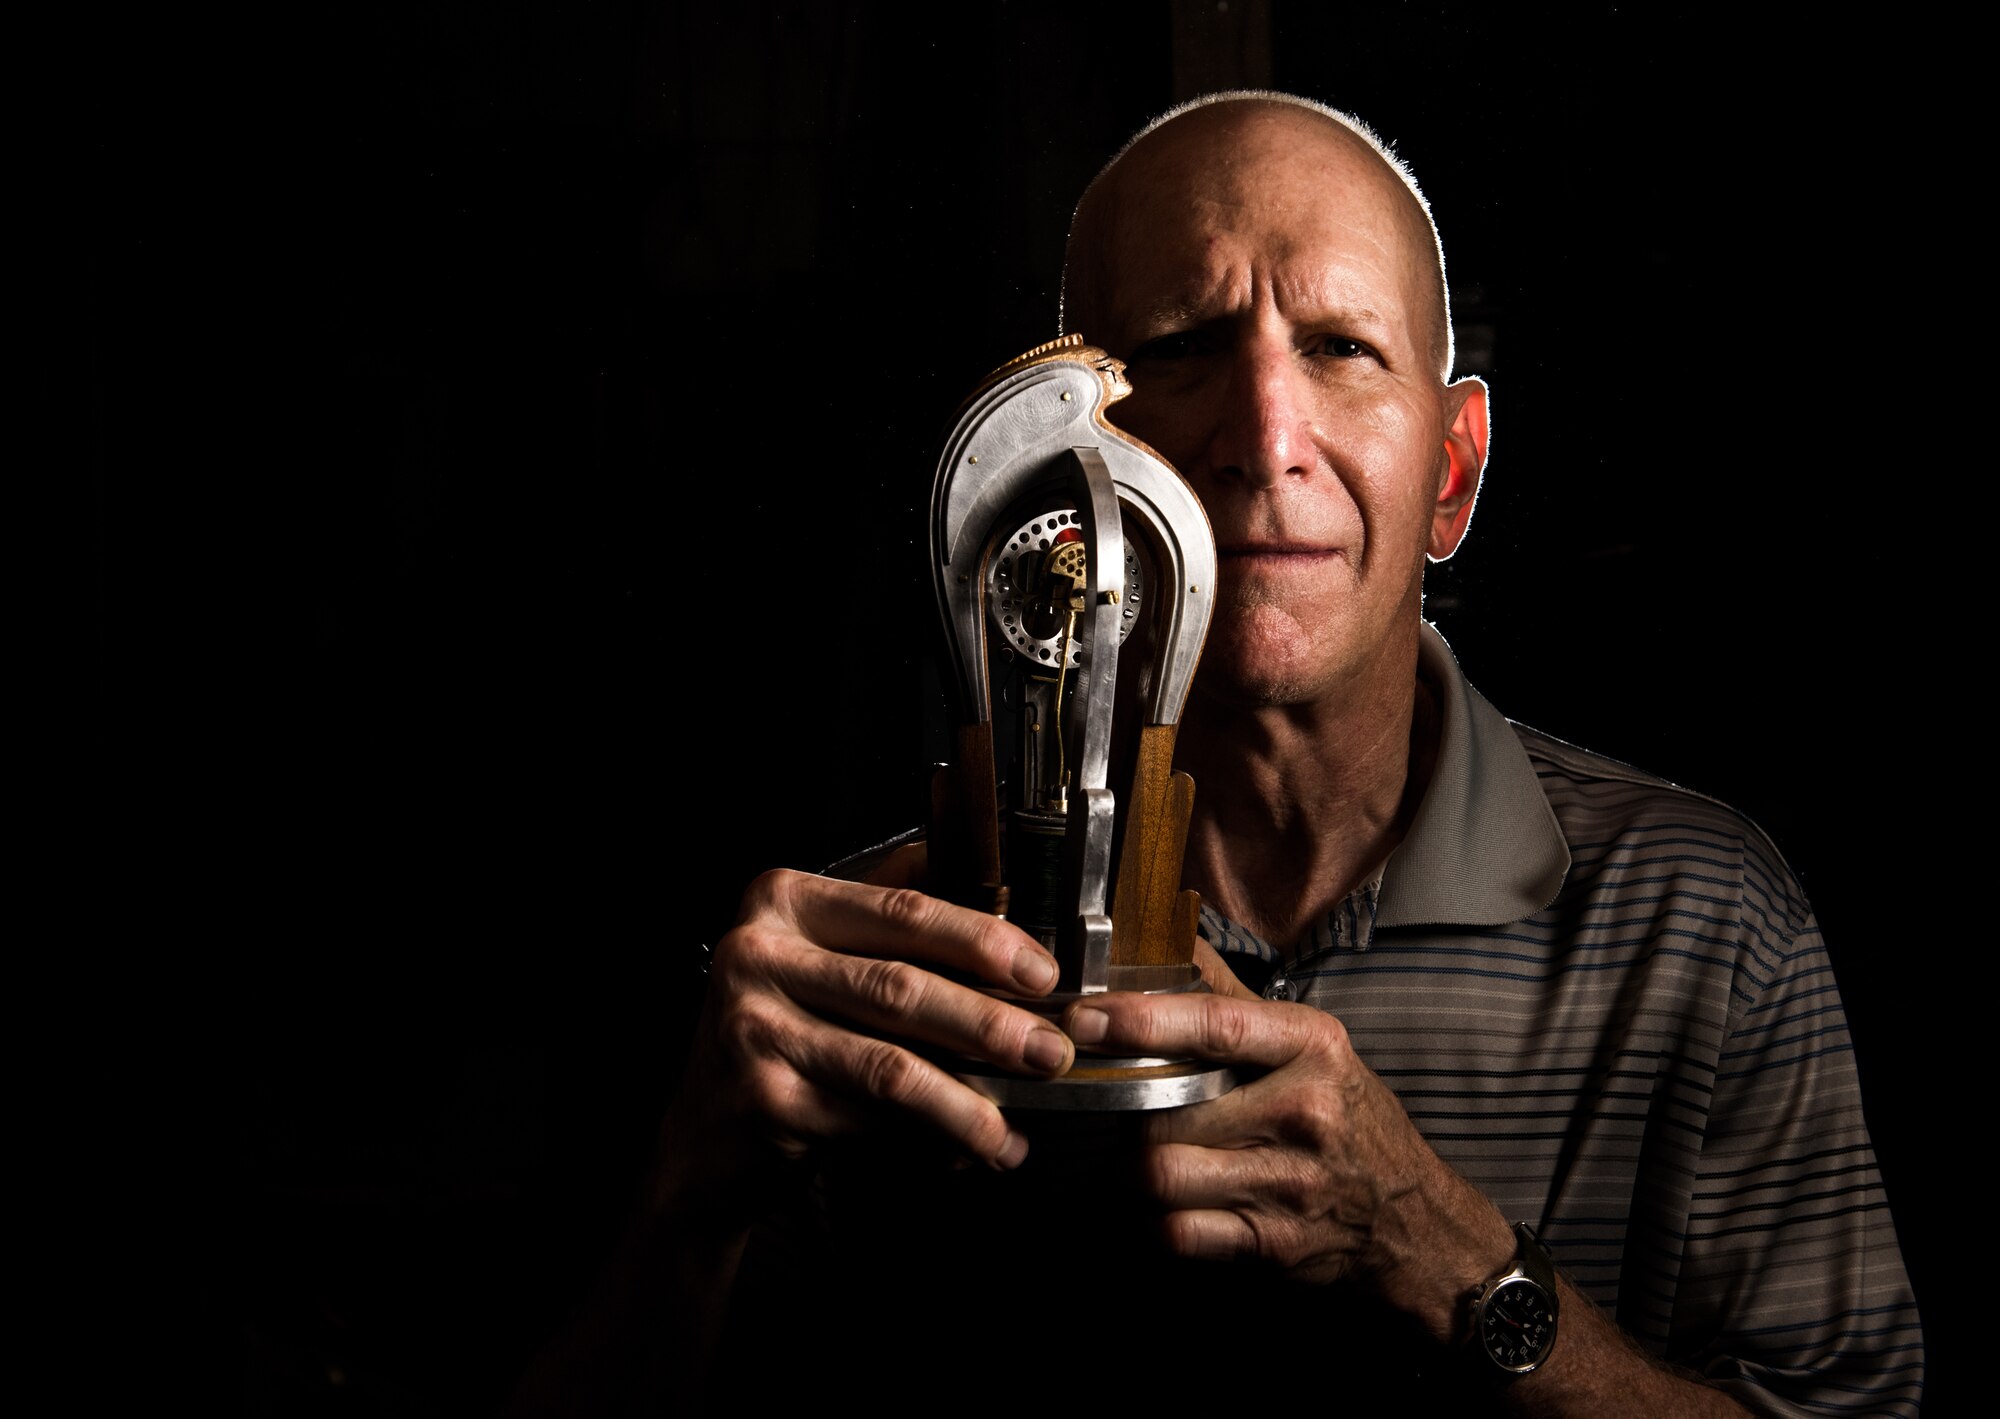 Retired U.S. Air Force Master Sgt. Daniel Holmes photographed at his home in Lowell, Mass. holding one of his handmade kinetic sculptures, Jun. 1, 2018. Holmes teaches Airmen various electronic and mechanical skills not taught during their technical training, often utilizing kinetic sculptures he builds by hand. The concepts enable Airmen to maintain 1960's era technology used  at the Sagamore Hill Solar Observatory of the 2nd Weather Squadron, Det. 2, in Hamilton, Mass. (U.S. Air Force photo by J.M. Eddins Jr.)